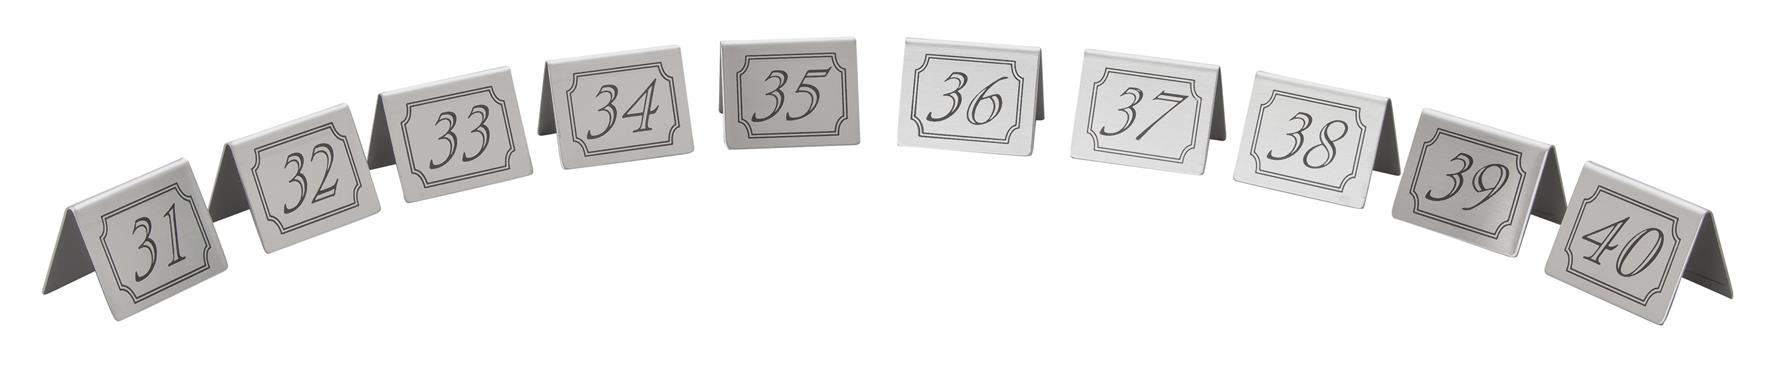 31-40 Stainless Steel Table Numbers (Each) 31-40, Stainless, Steel, Table, Numbers, Beaumont